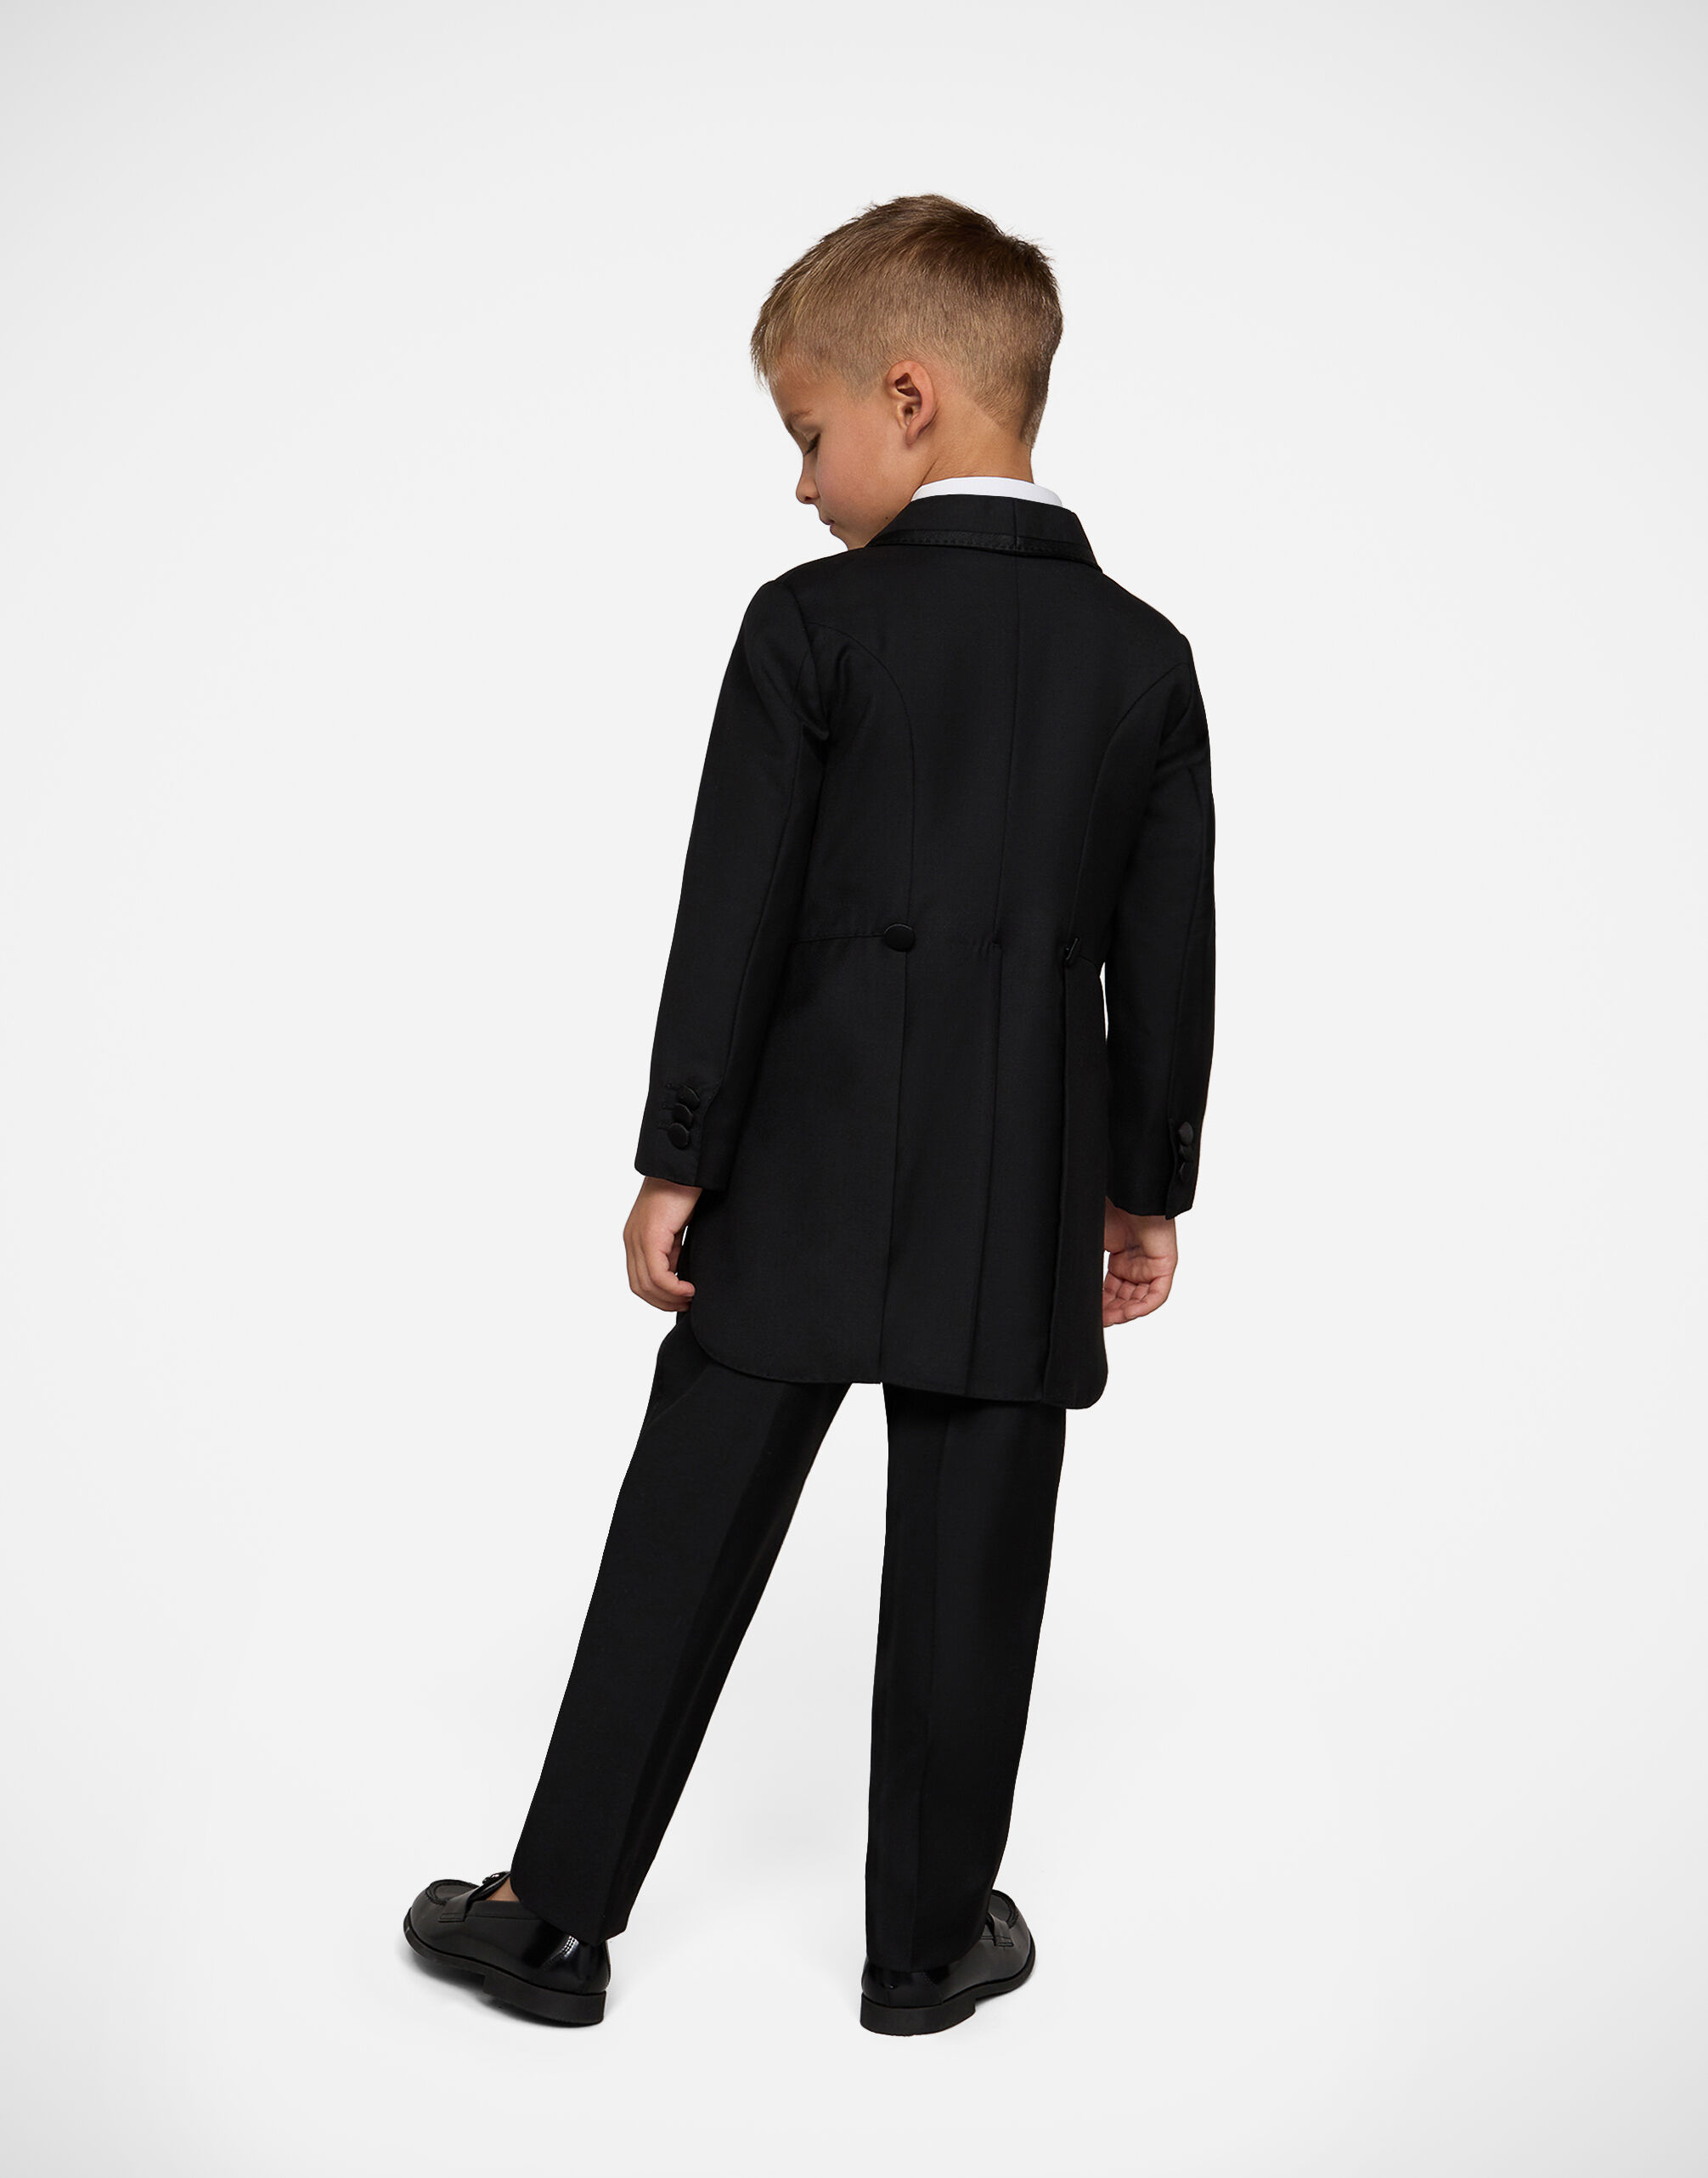 Single-breasted evening suit in stretch woolen fabric